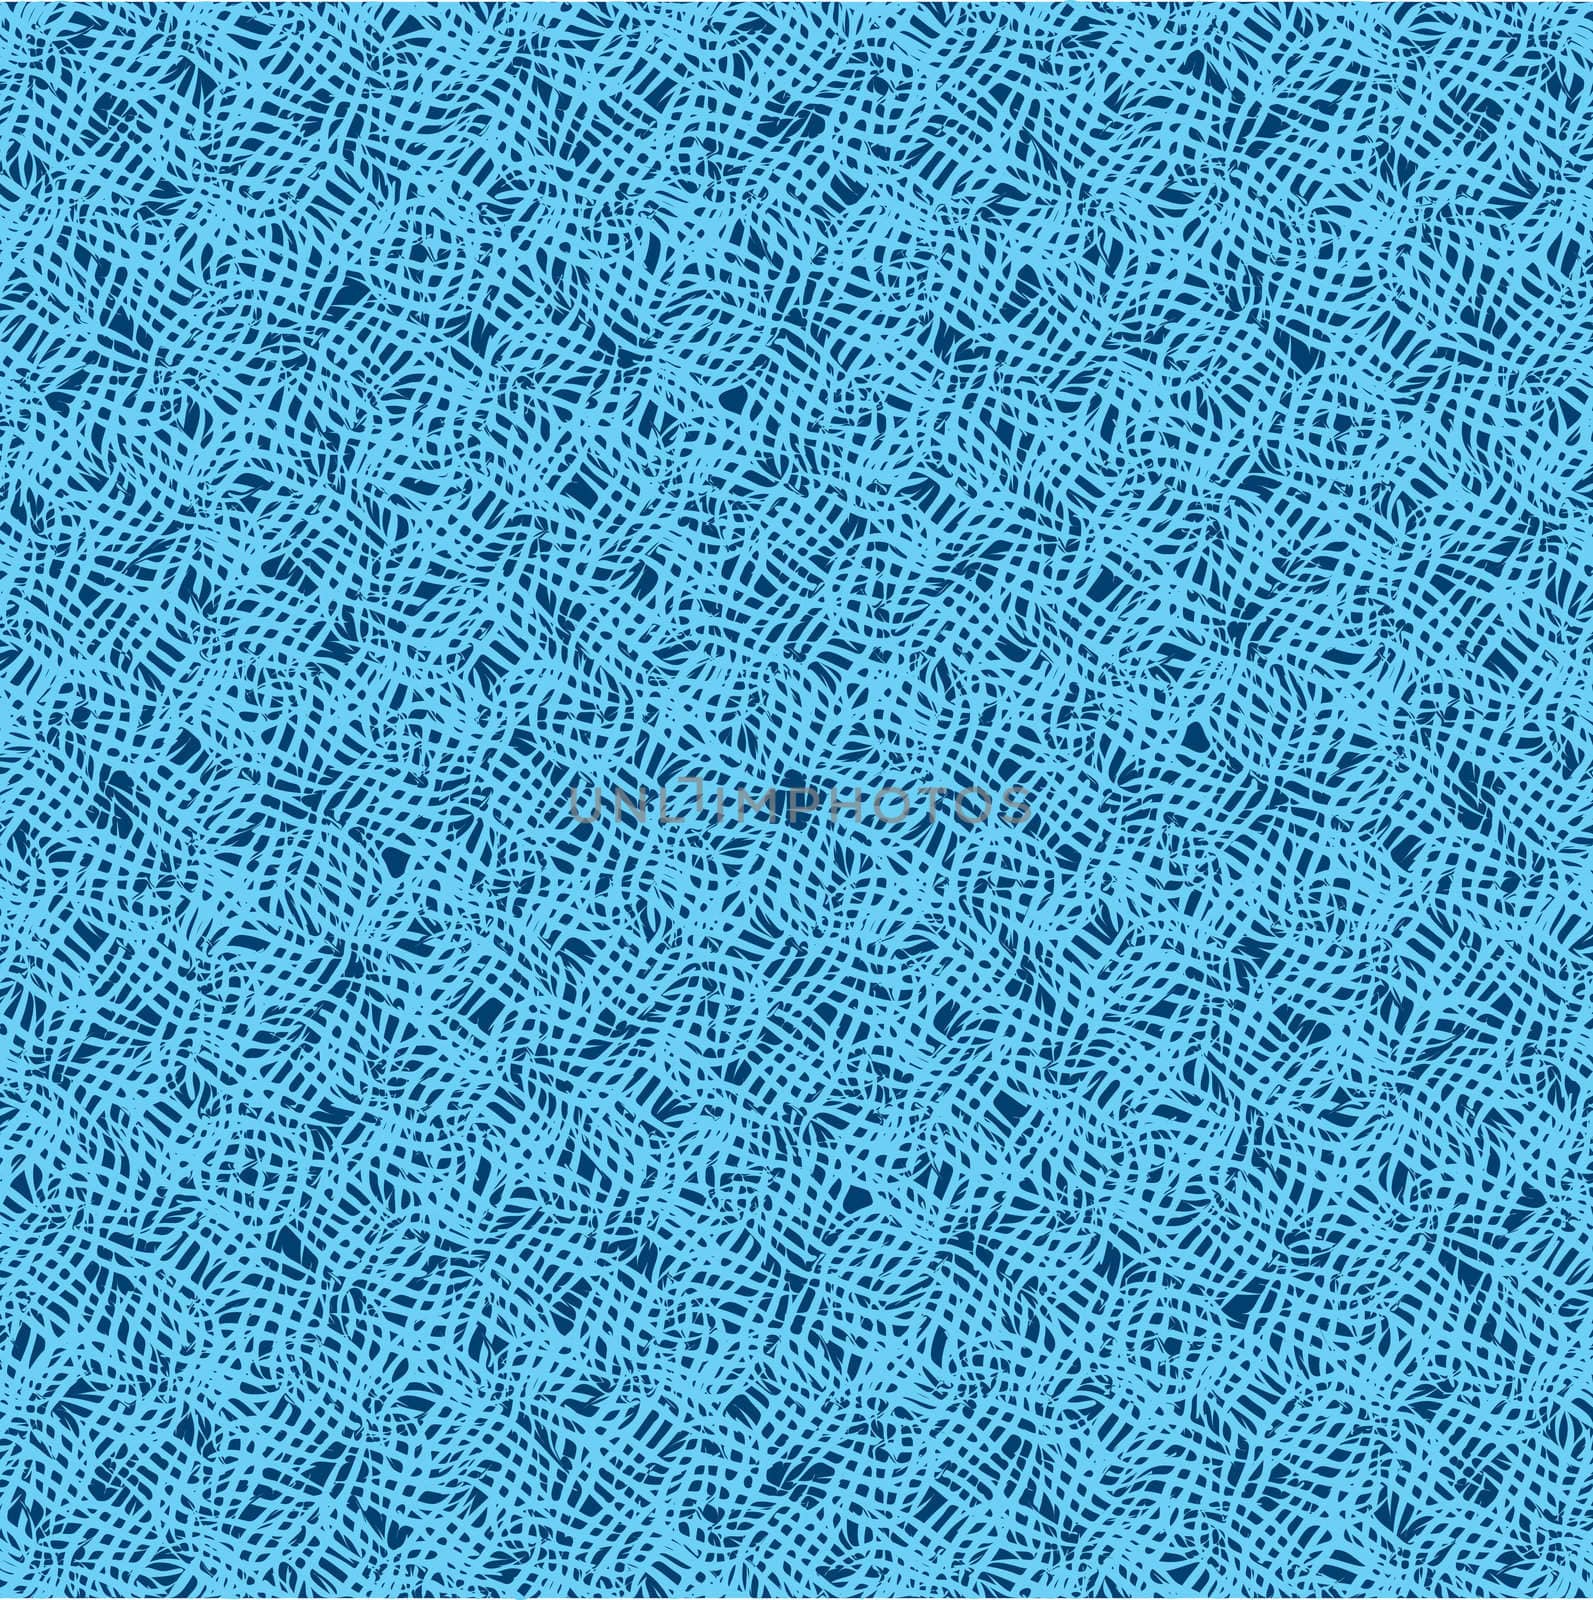 Abstract shades of blue background with woven seamless pattern